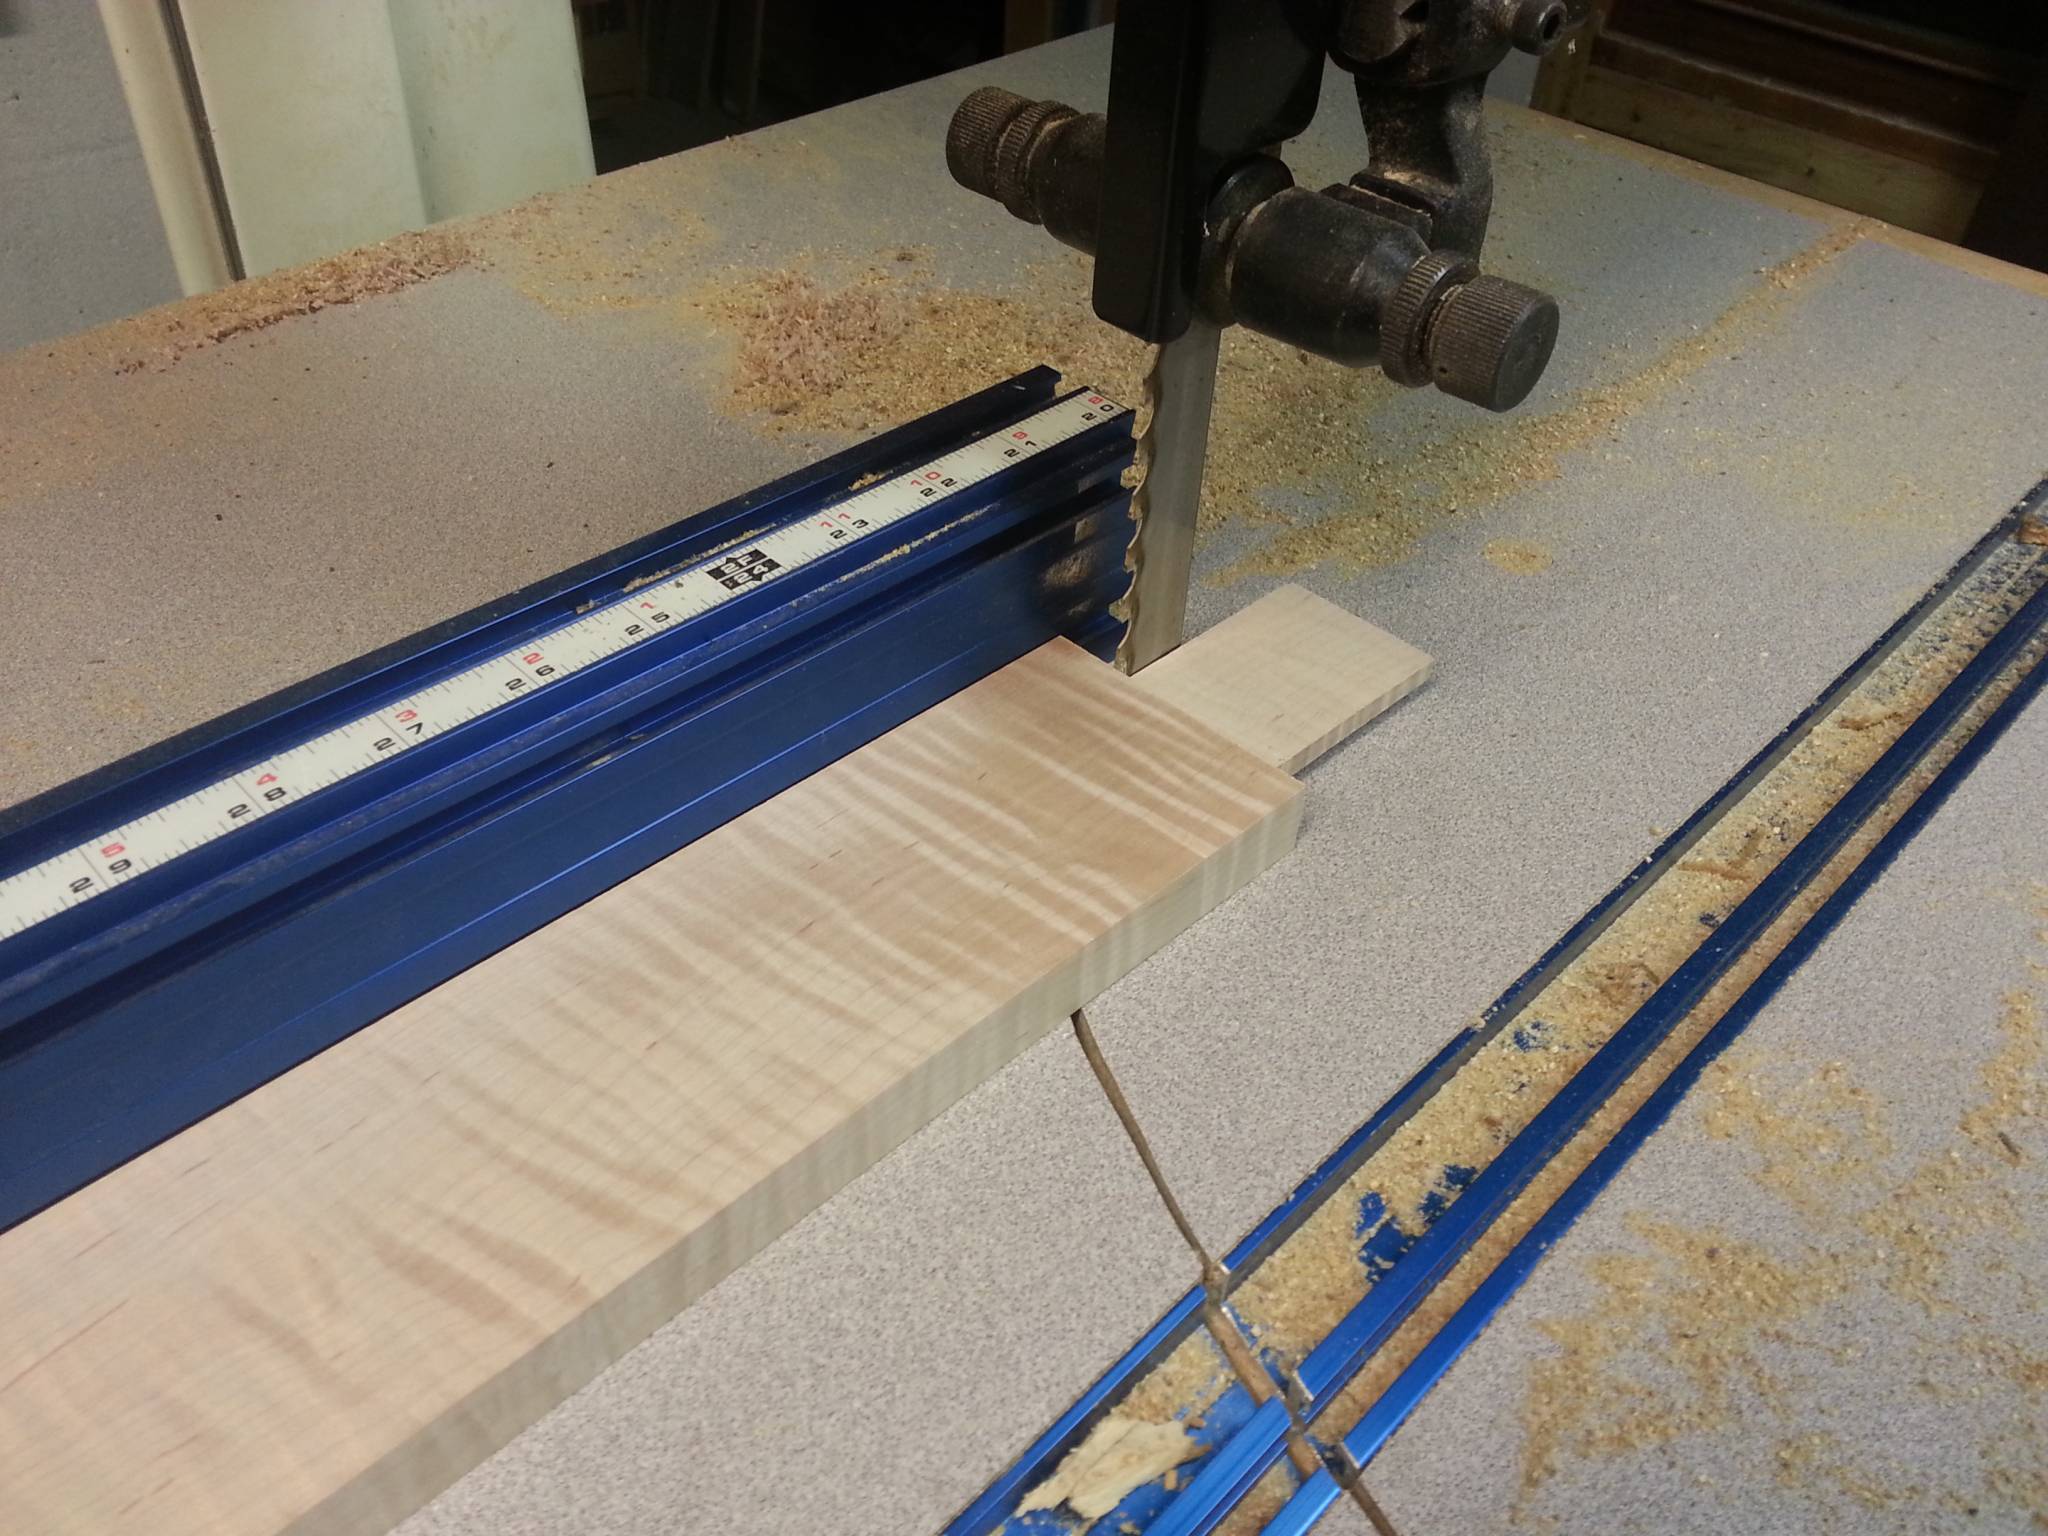 trimming tenons on bandsaw